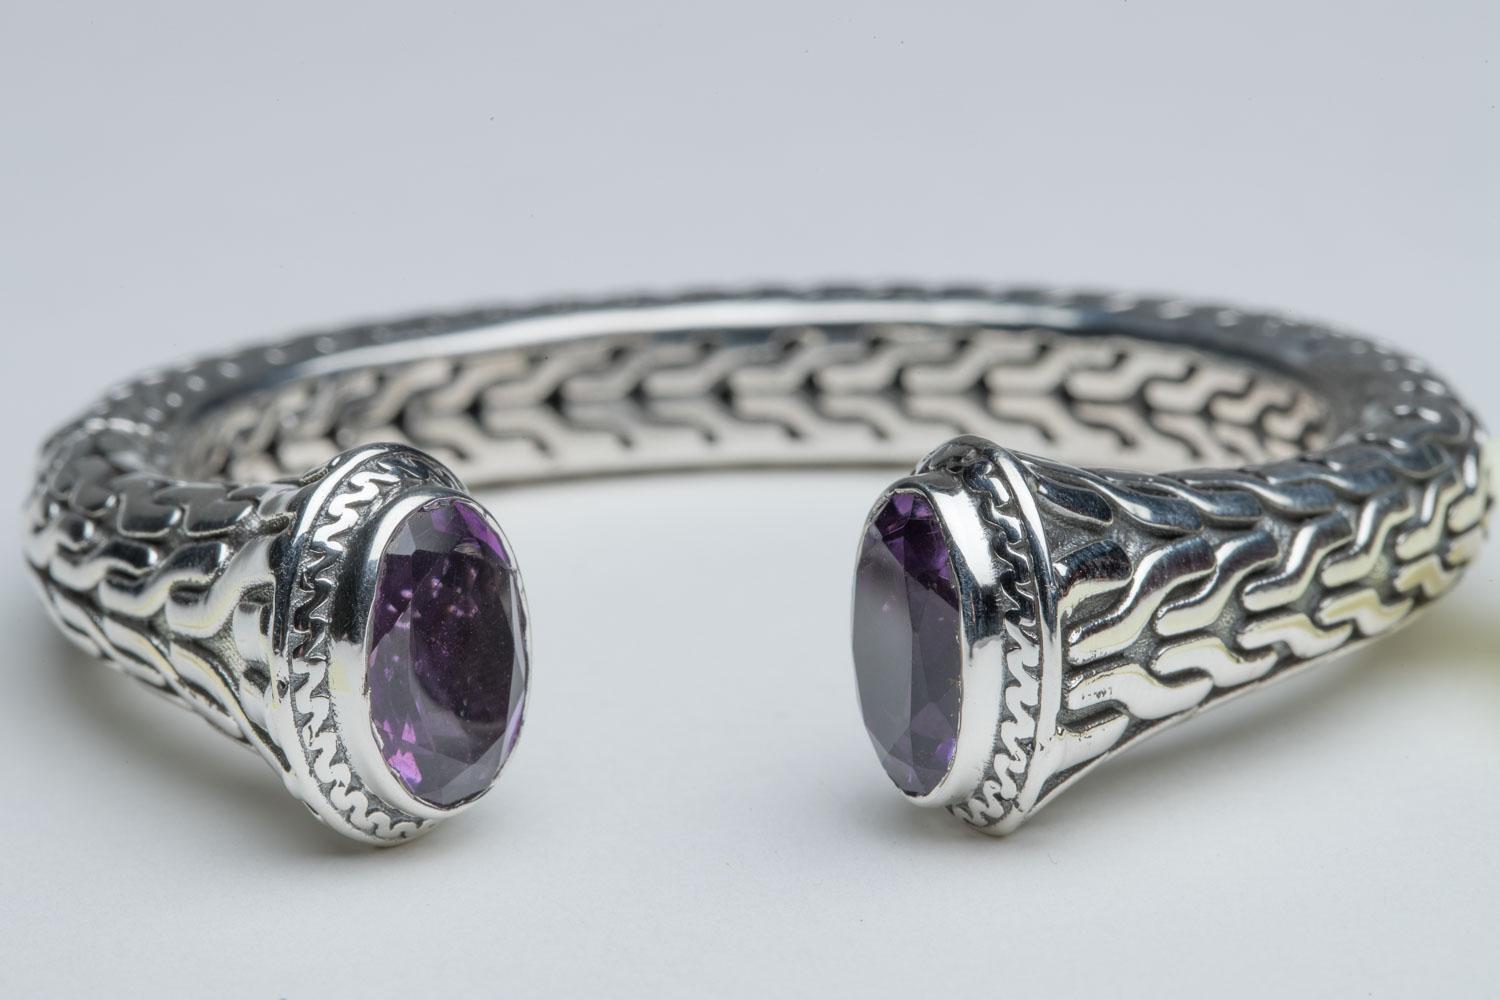 A hand crafted sterling silver clamper or cuff bracelet with a herringbone pattern along the lines of John Hardy.  It is hinged on the side for easy on and off.  The top features two large faceted, oval amethyst stones.  Inside circumference is 6.5